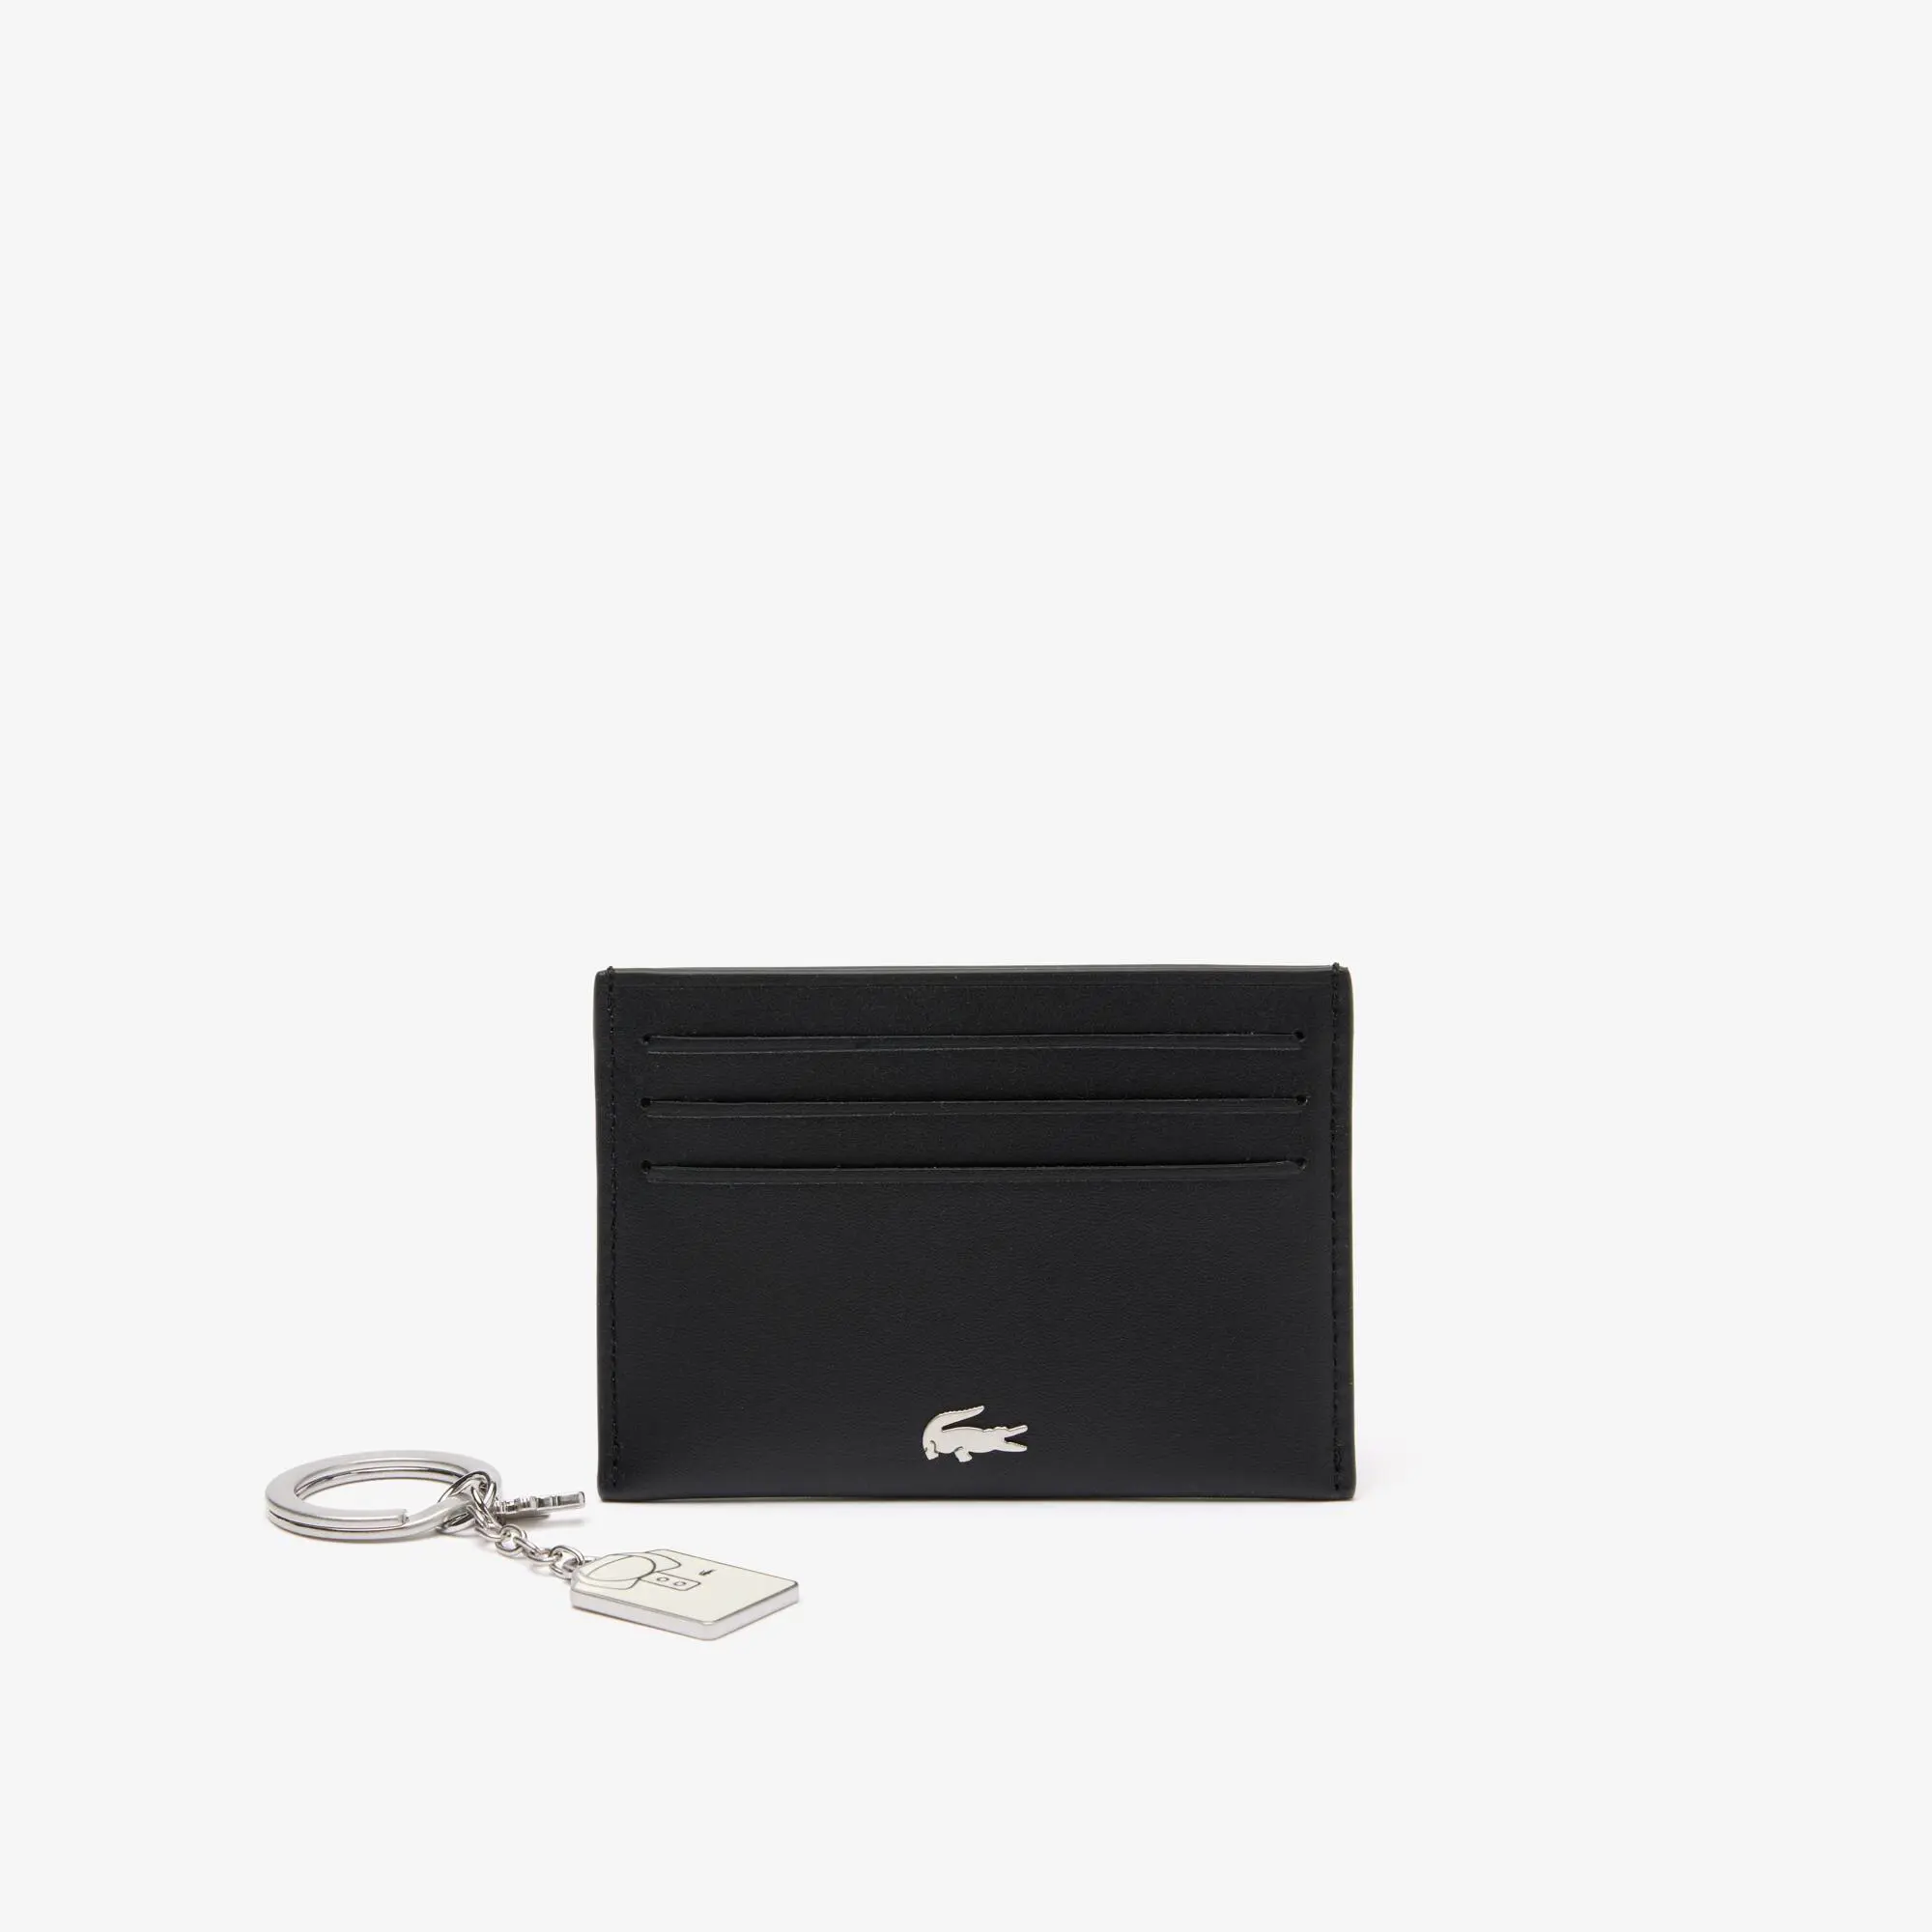 Lacoste Card Holder and Polo Key Chain Gift Set. 1